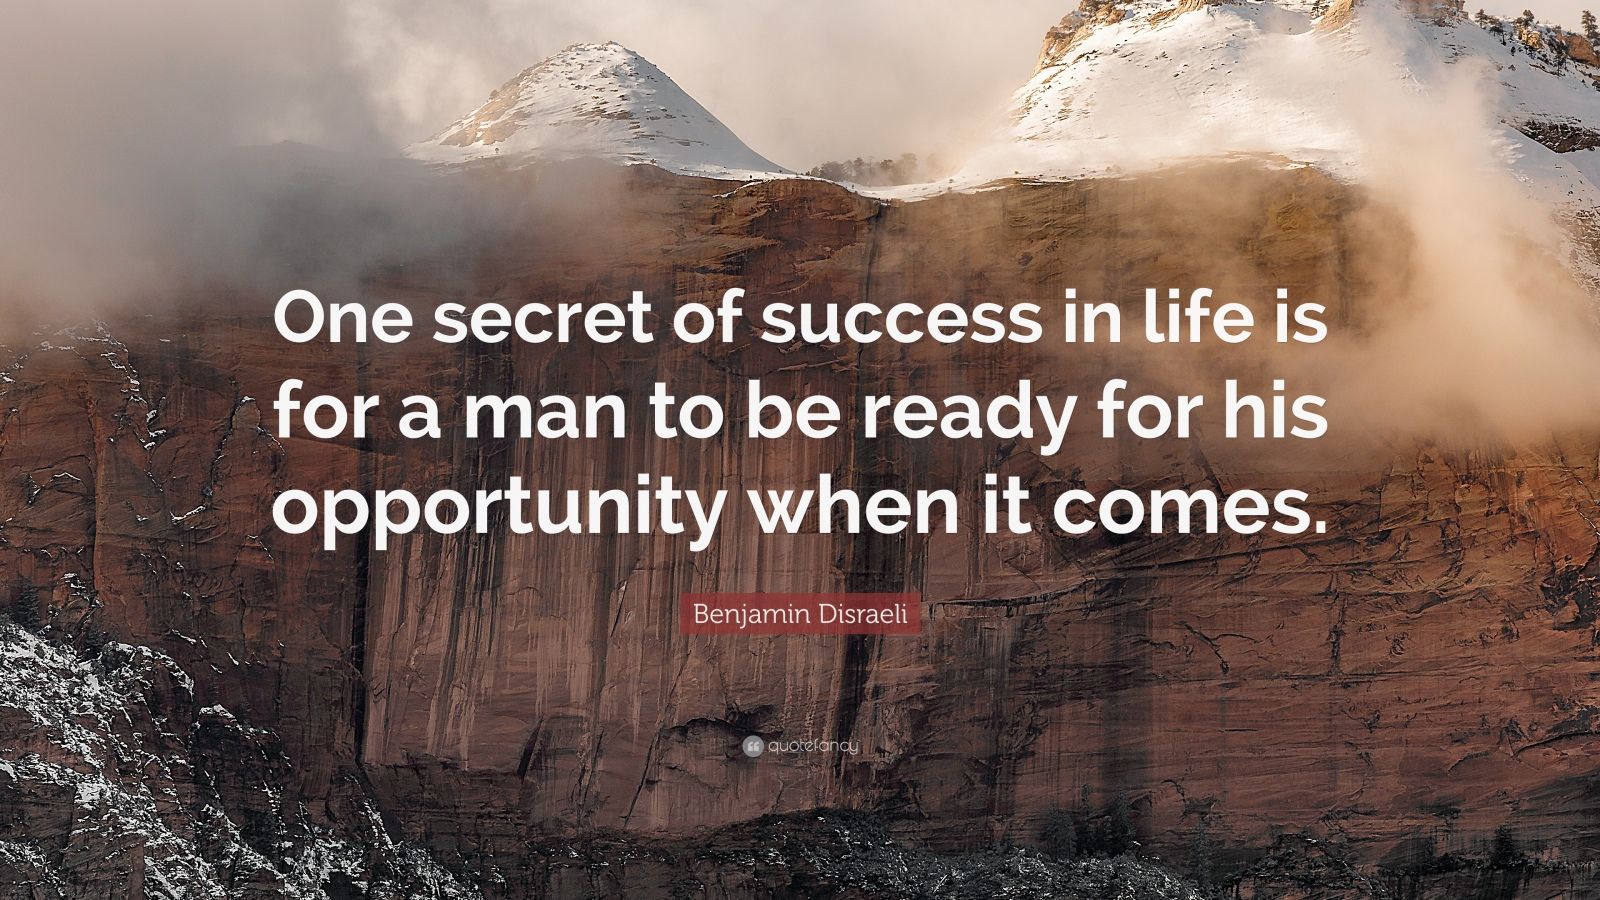 Benjamin Disraeli Quote “one Secret Of Success In Life Is For A Man To